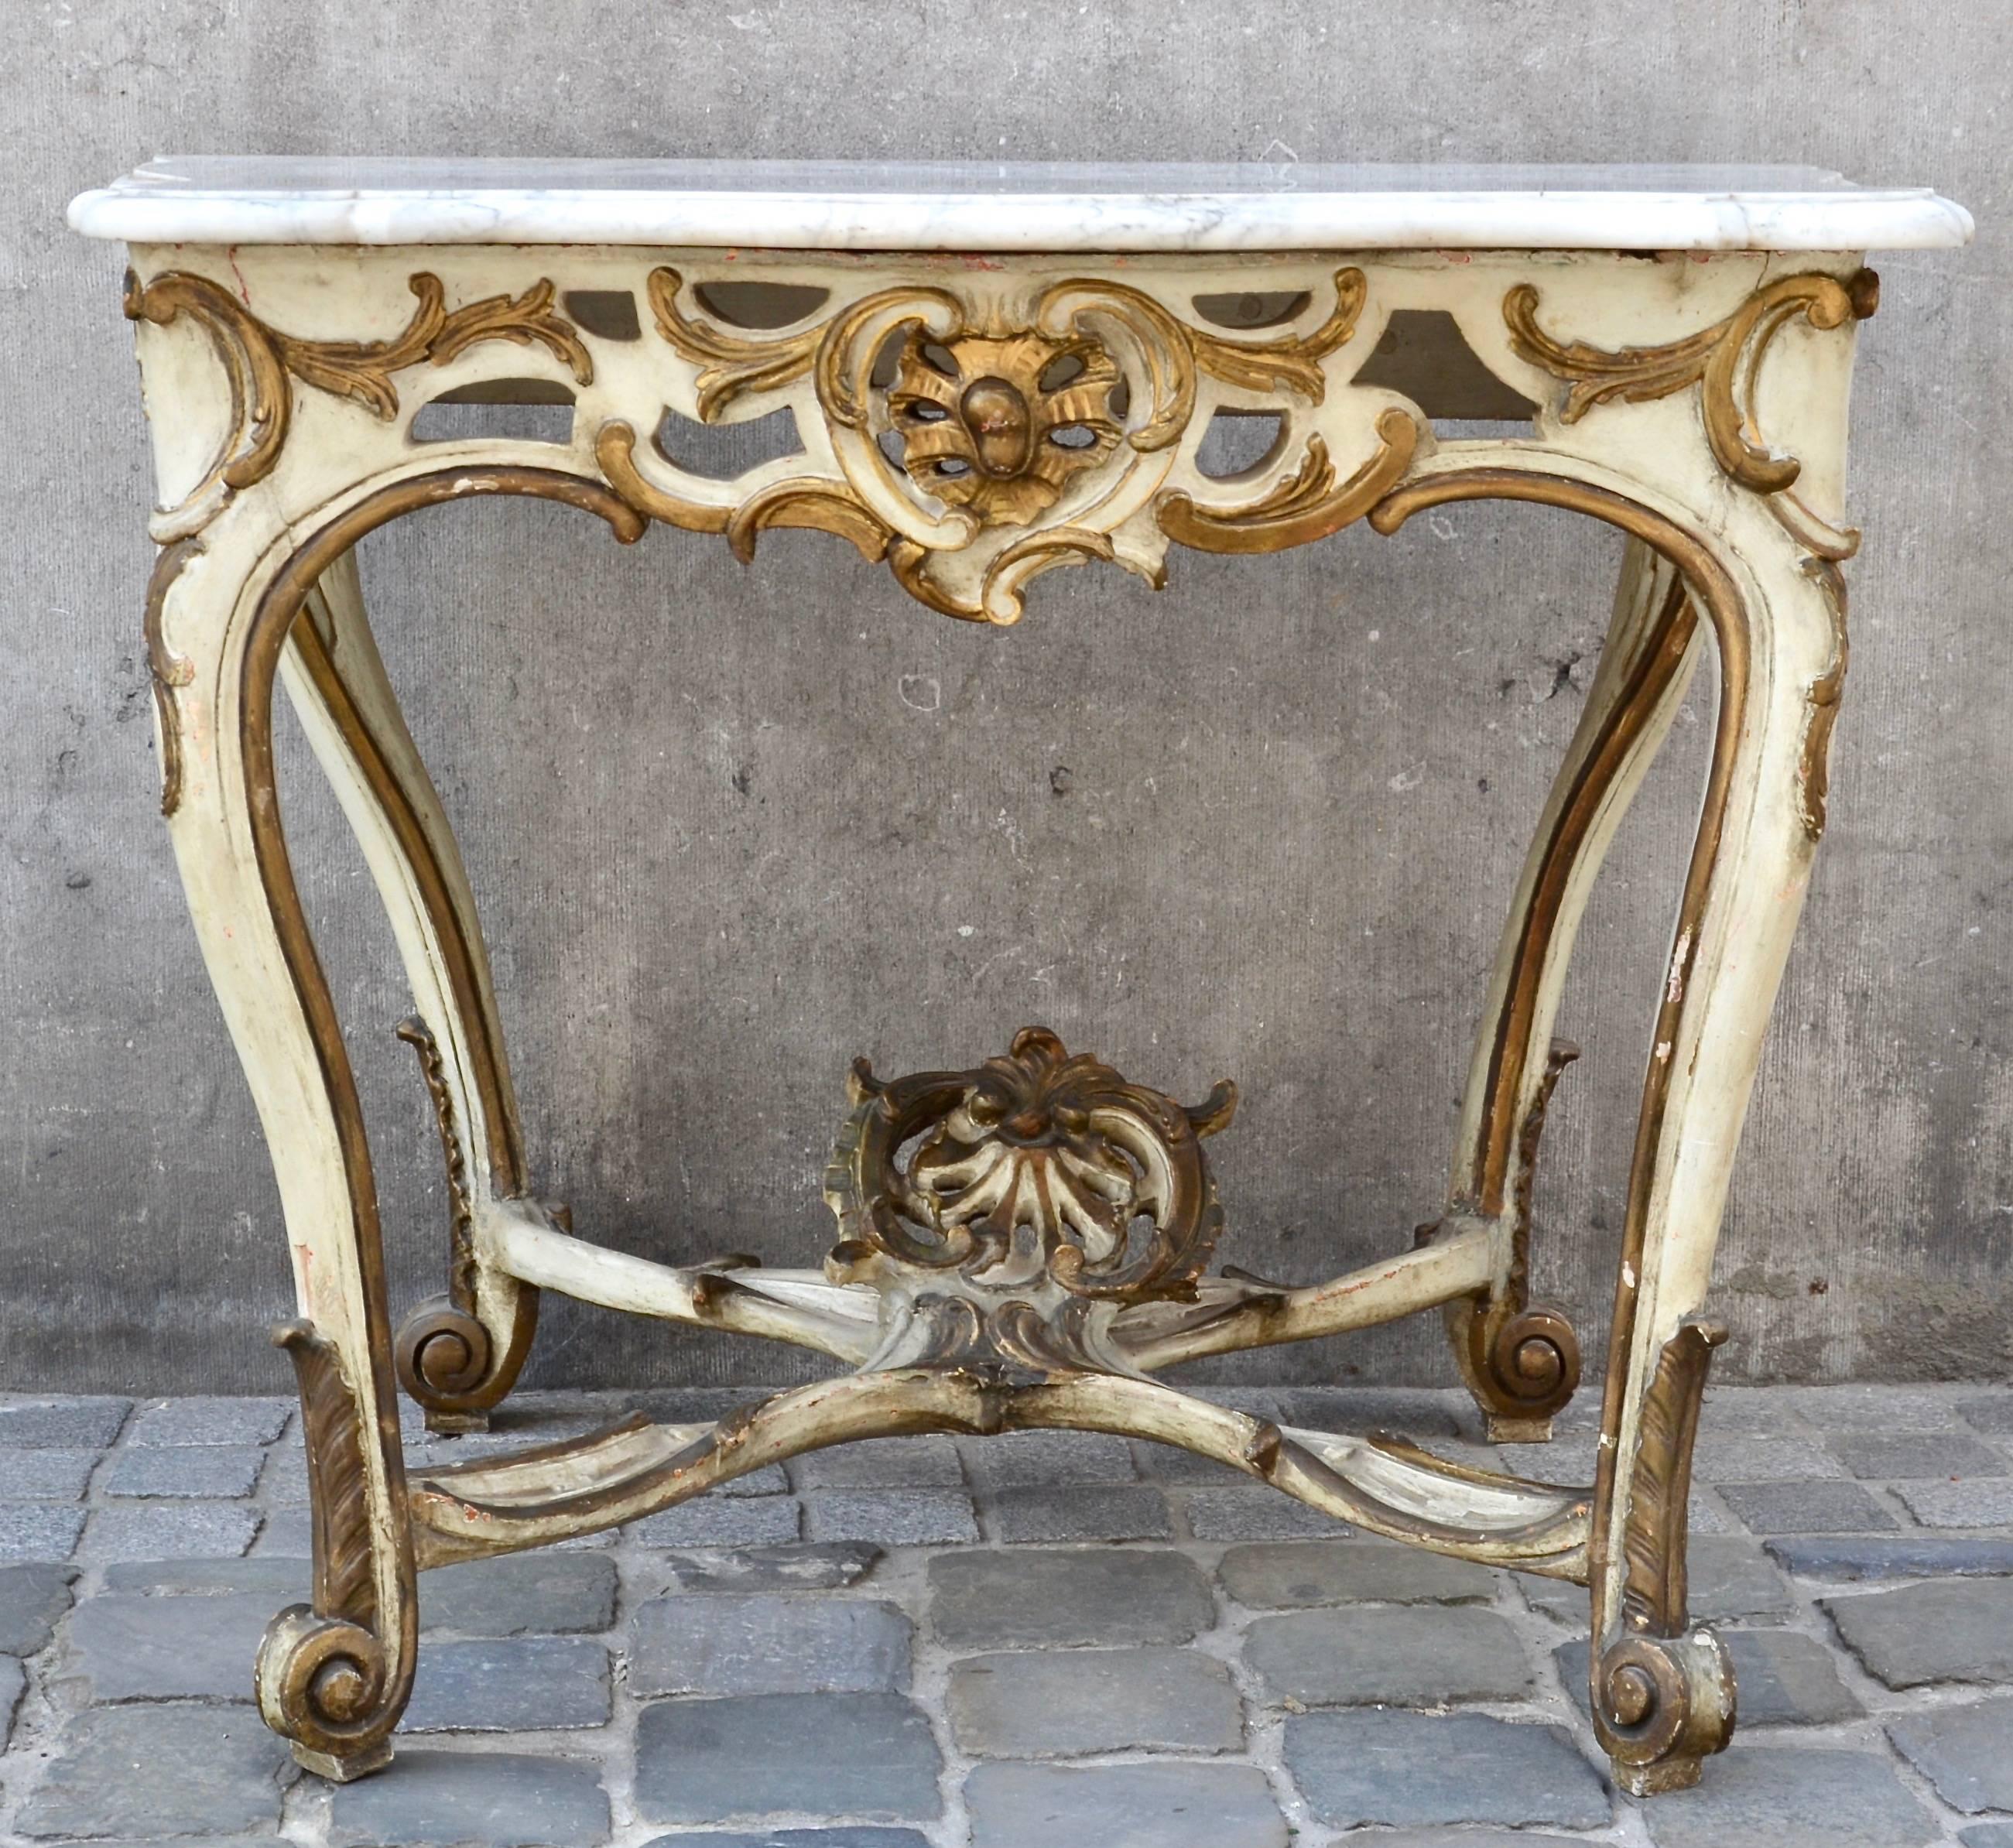 Elegant 18th century Italian Rococo console in marble and carved, gilt and painted wood.